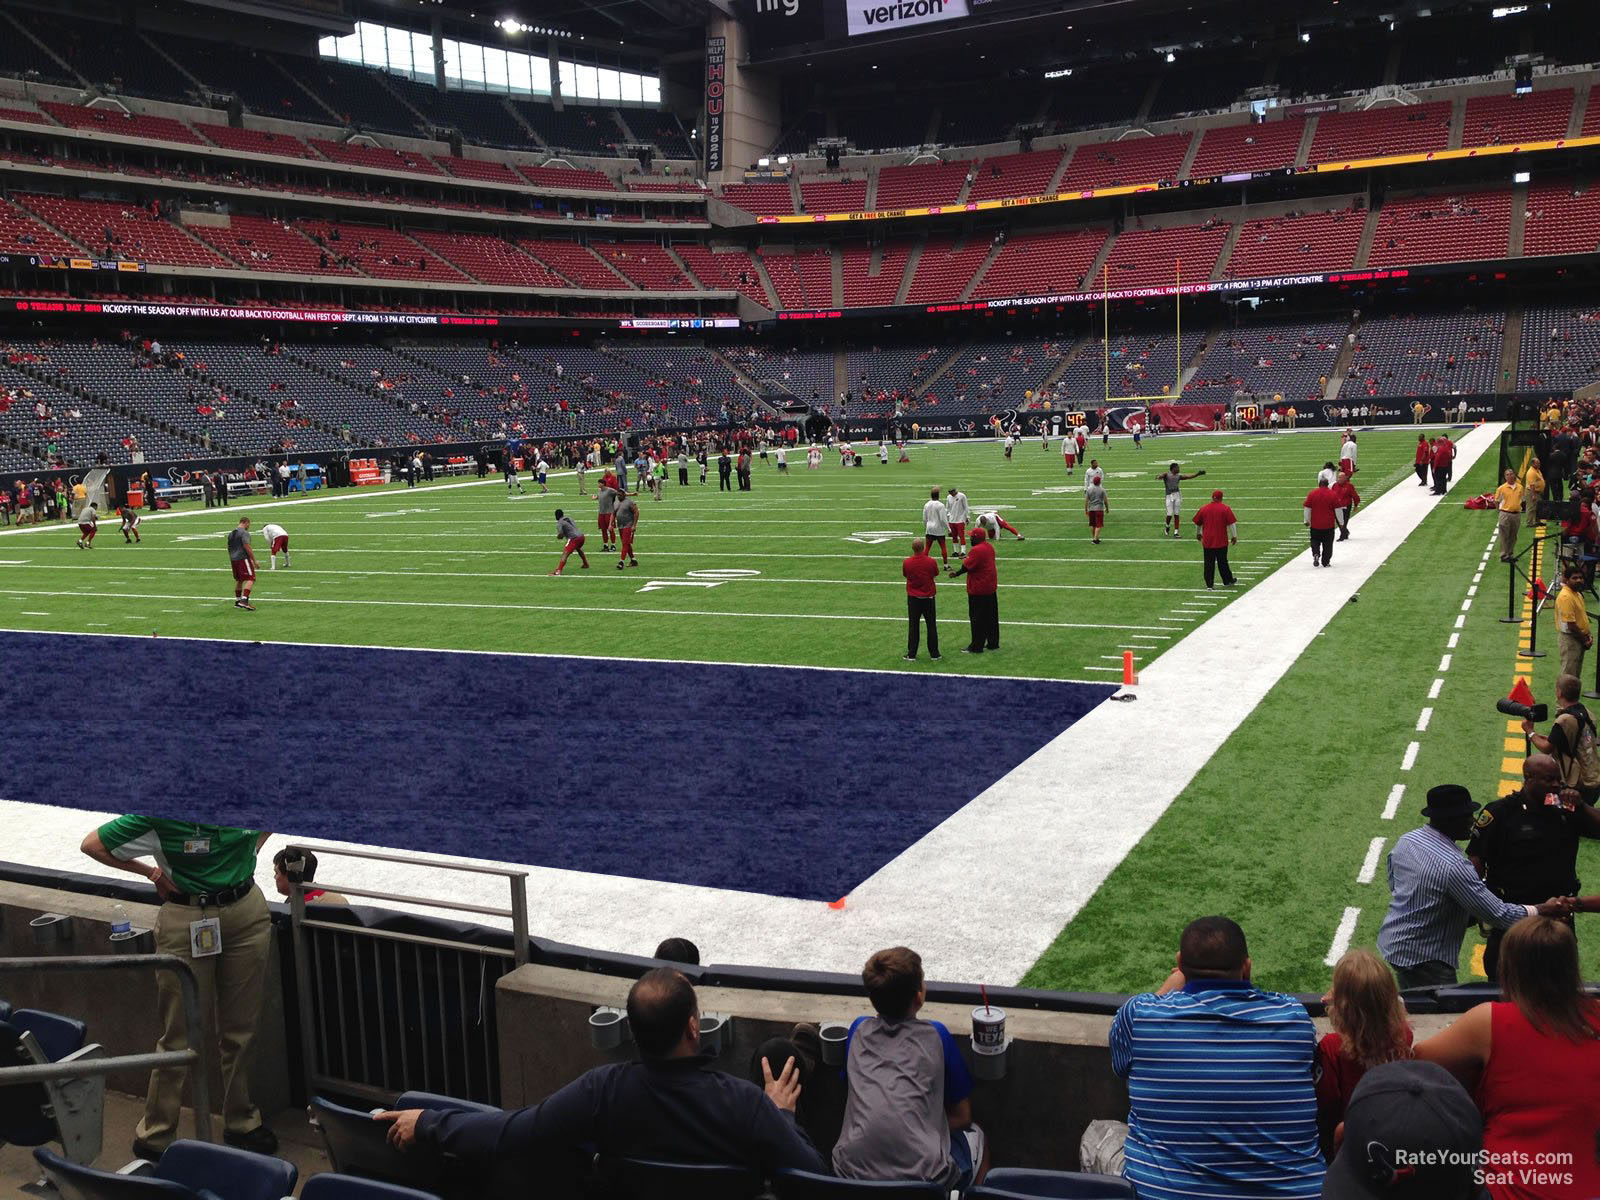 section 134, row c seat view  for football - nrg stadium